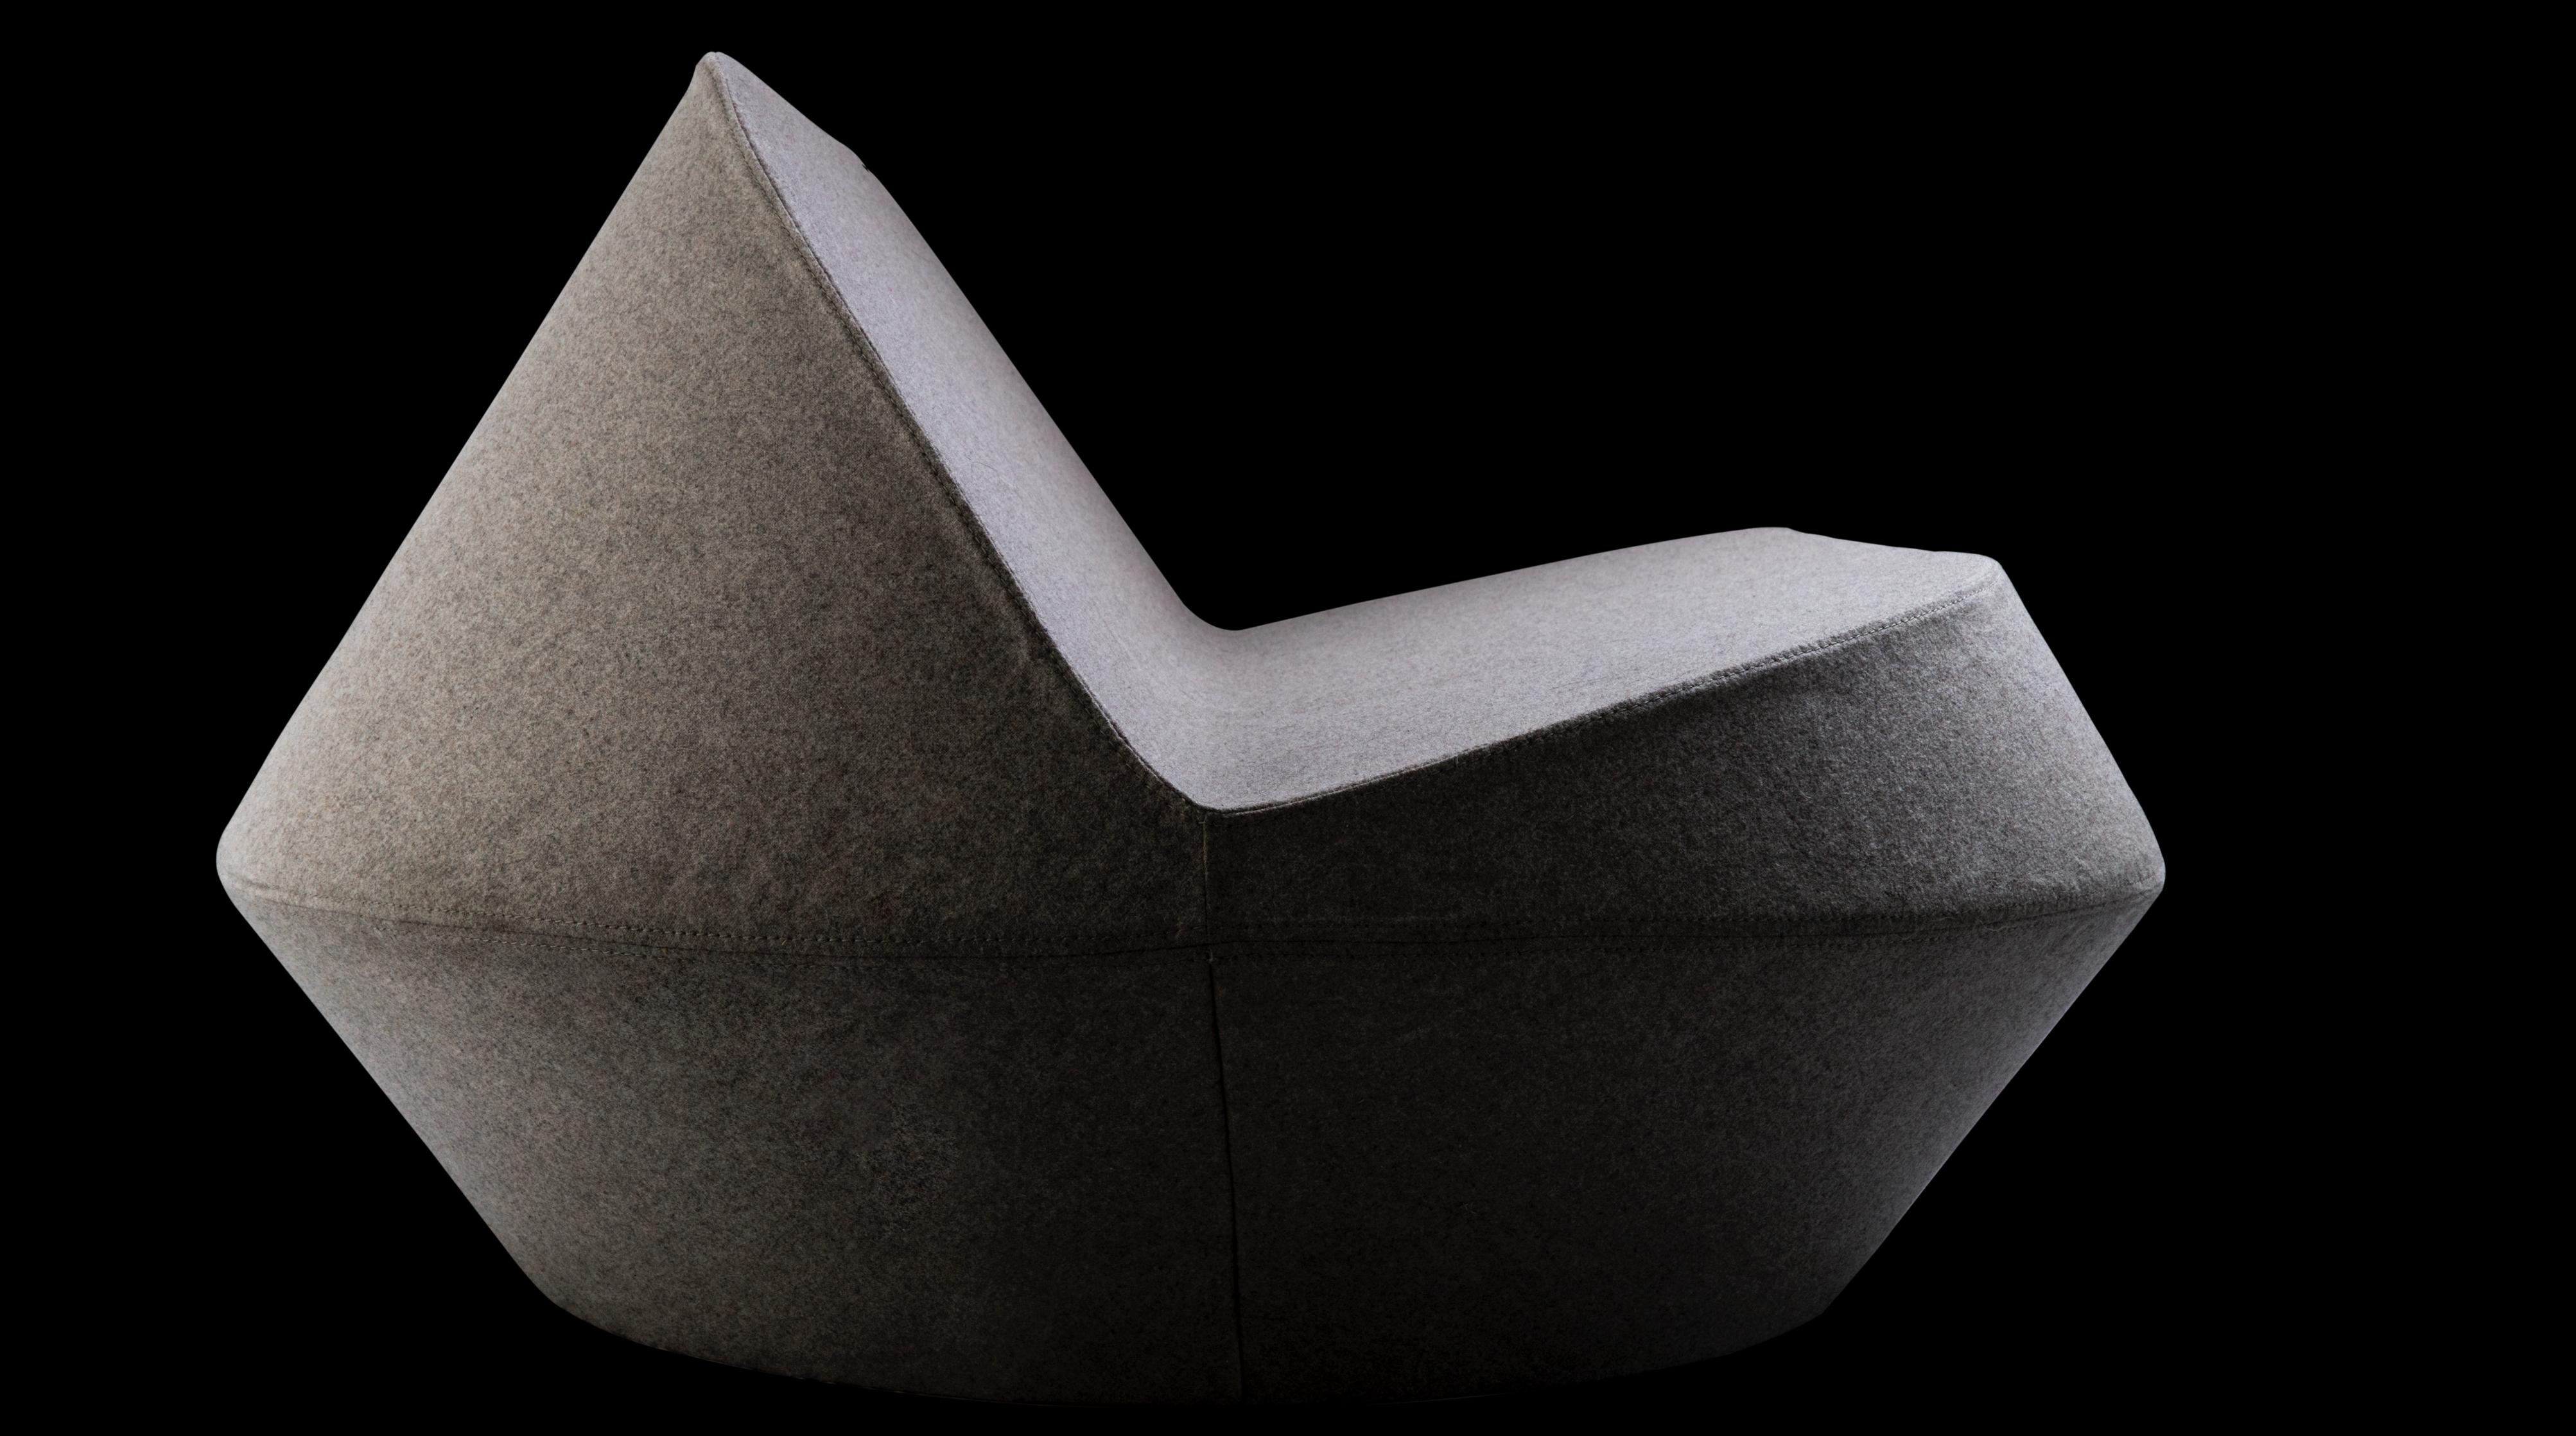 A wool loveseat design that is both contemporary and timeless, with geometrical cuts that fit to small spaces complimenting both residential and corporate interiors. The foam brings softness and structure at the same time making the piece flexible,